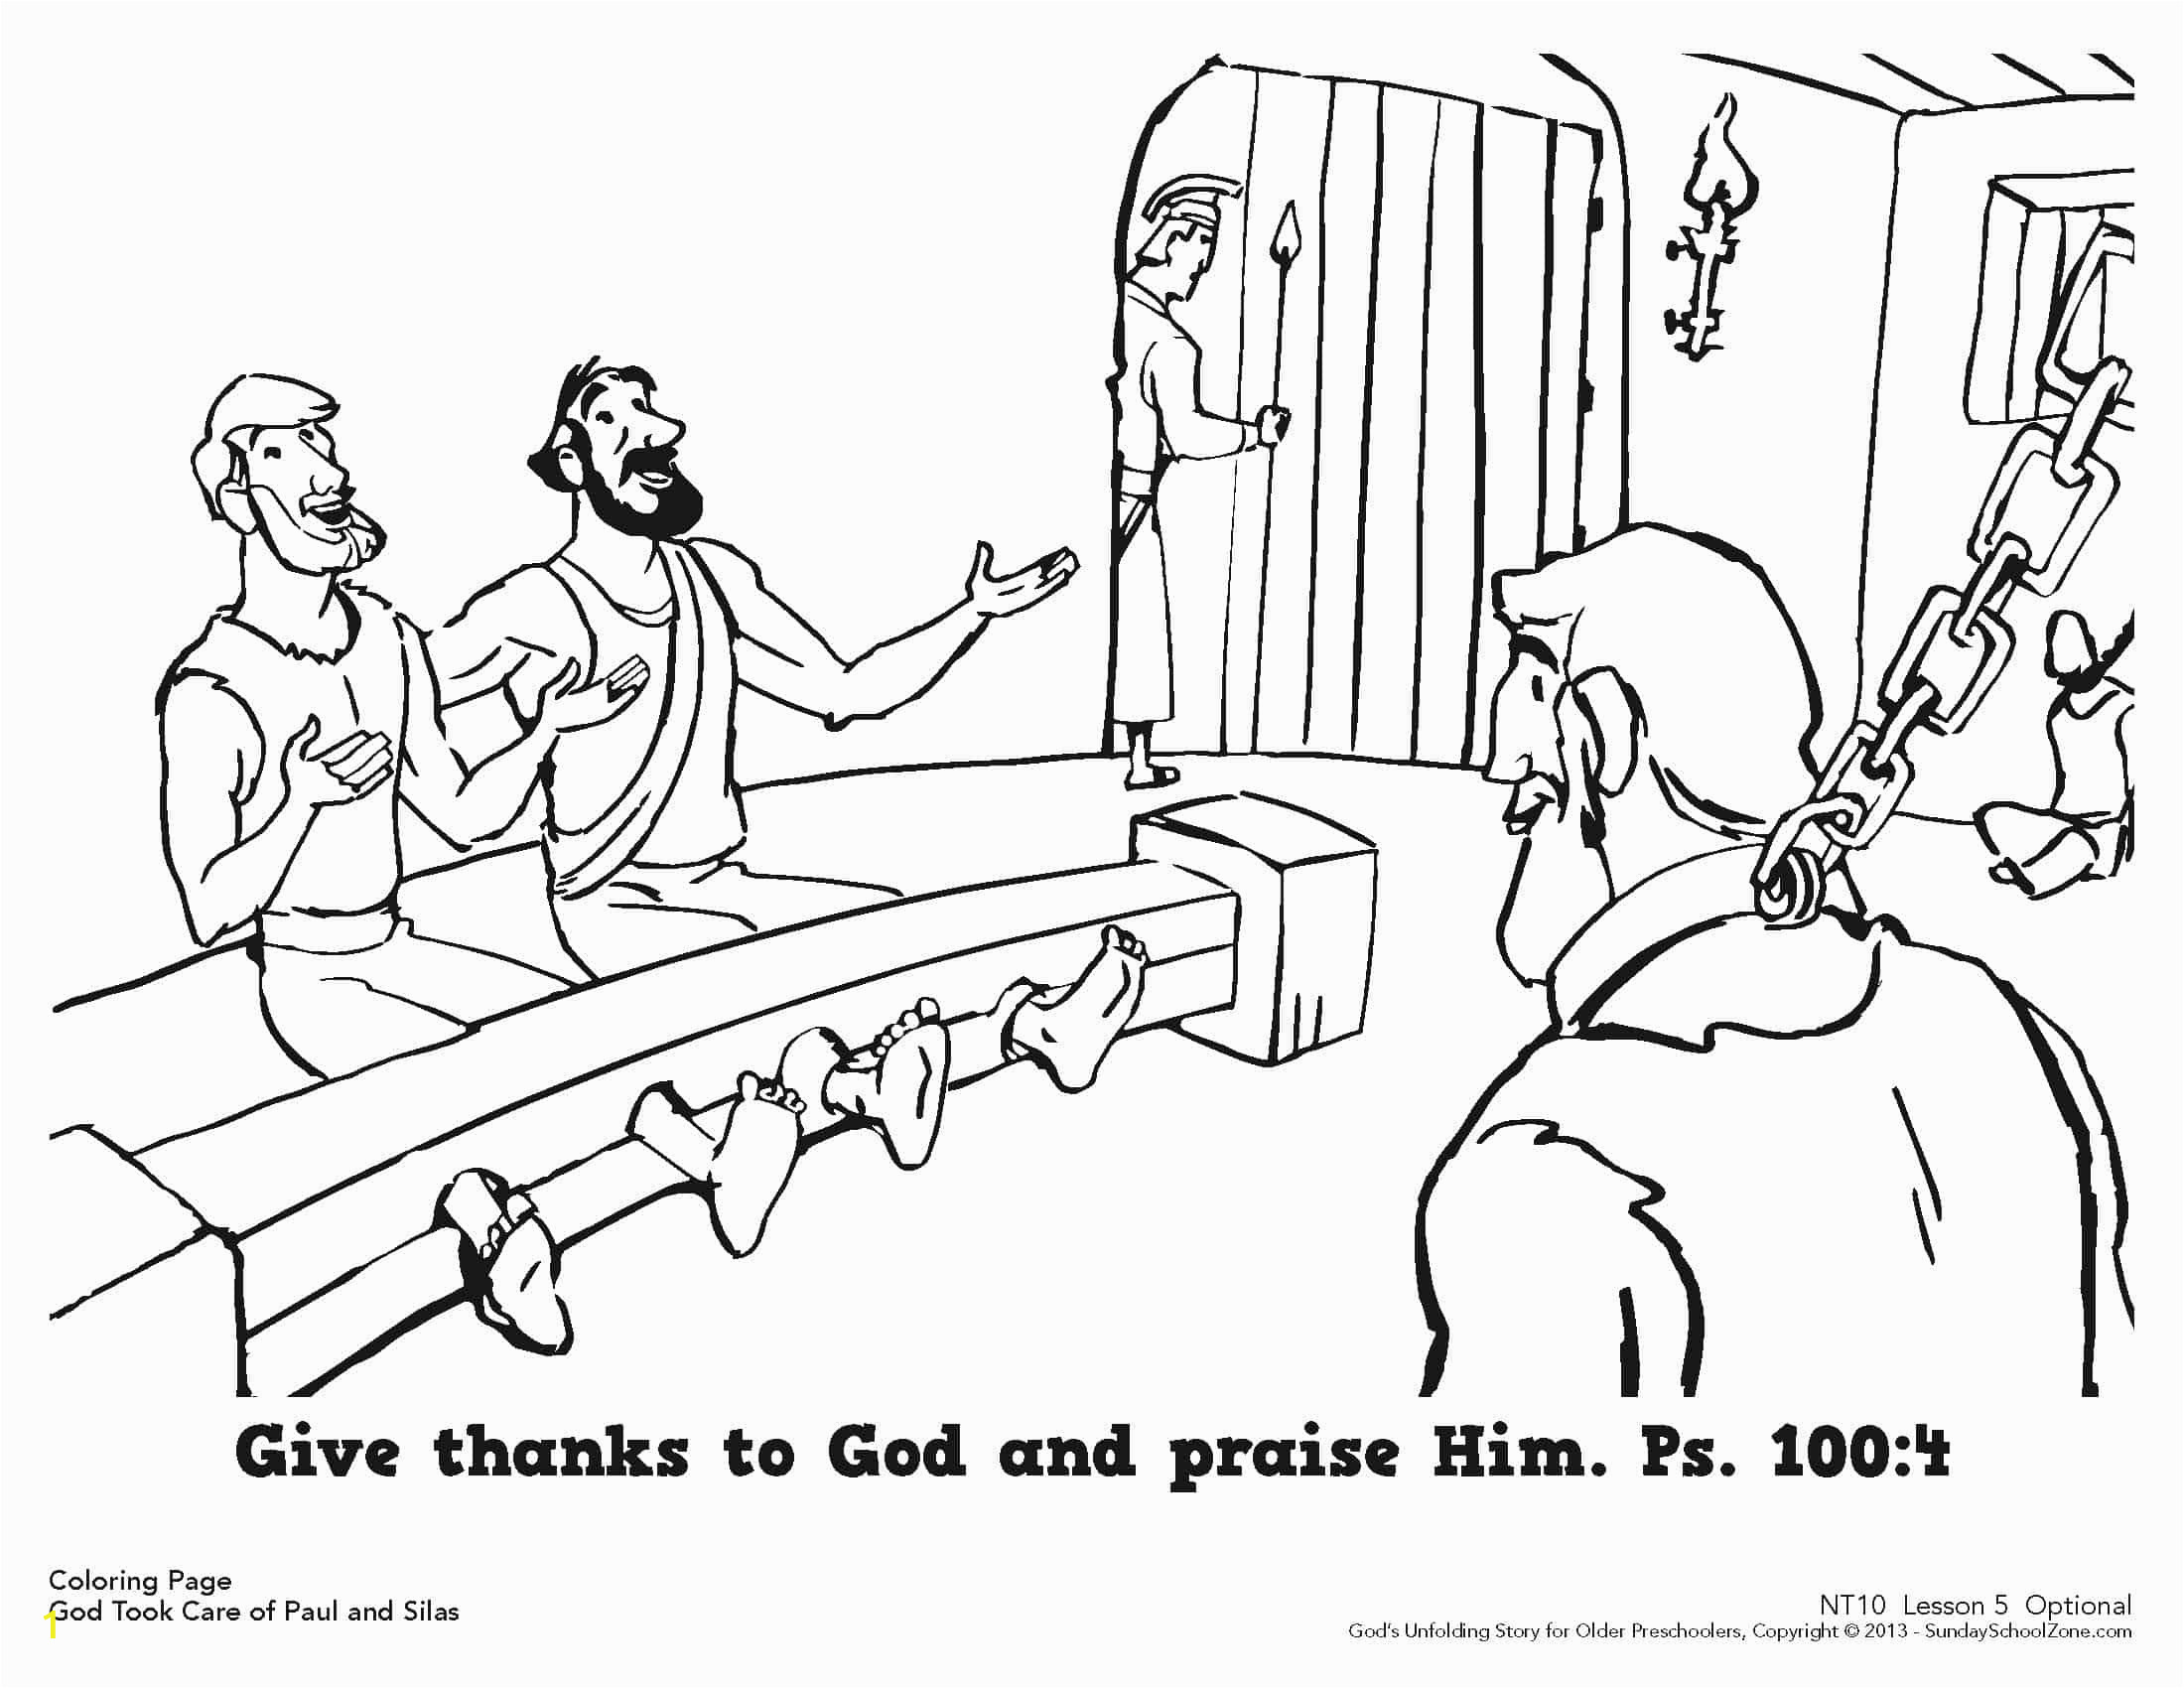 paul and silas were rescued from jail coloring page